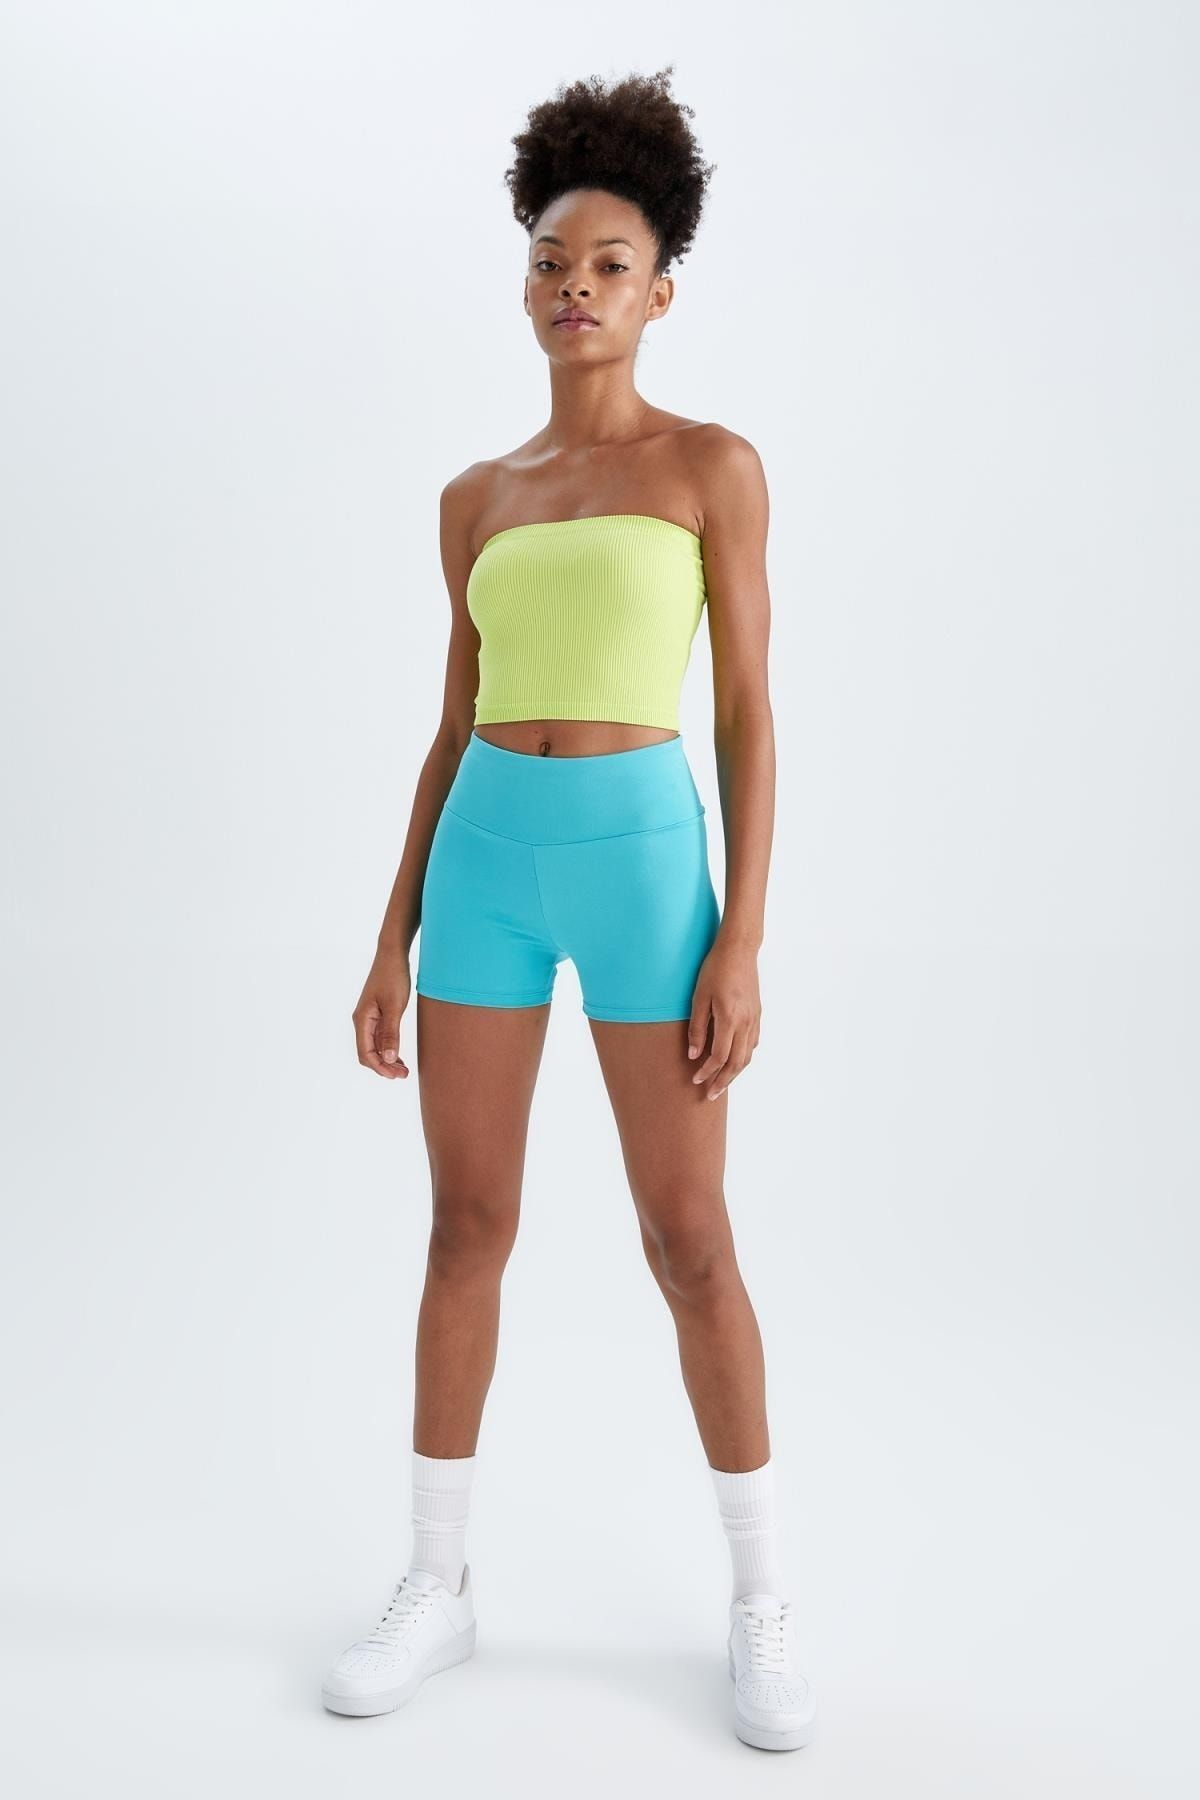 Stylish Green Hooded Sports Bra by Defacto